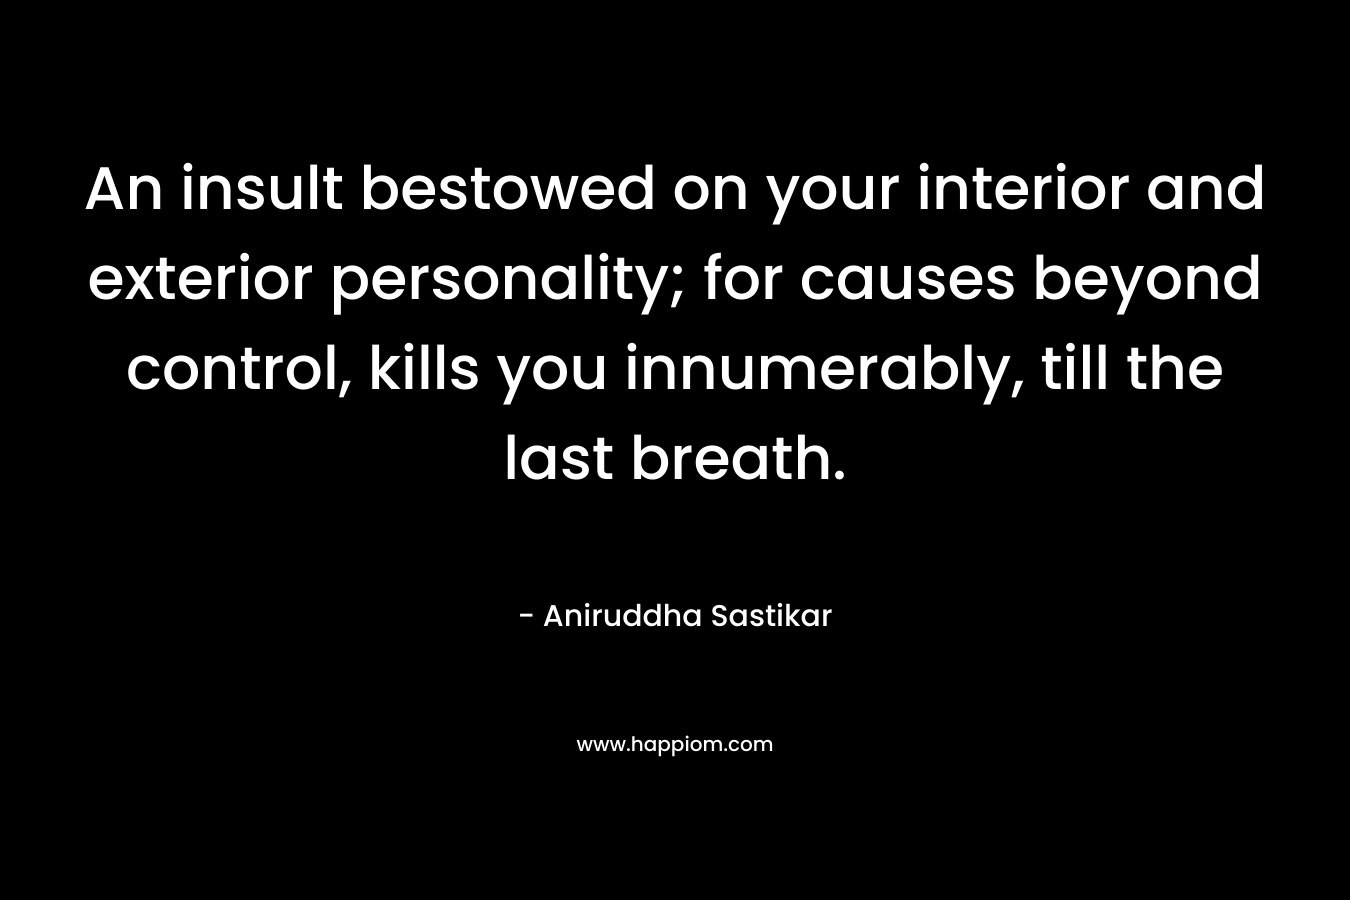 An insult bestowed on your interior and exterior personality; for causes beyond control, kills you innumerably, till the last breath. – Aniruddha Sastikar